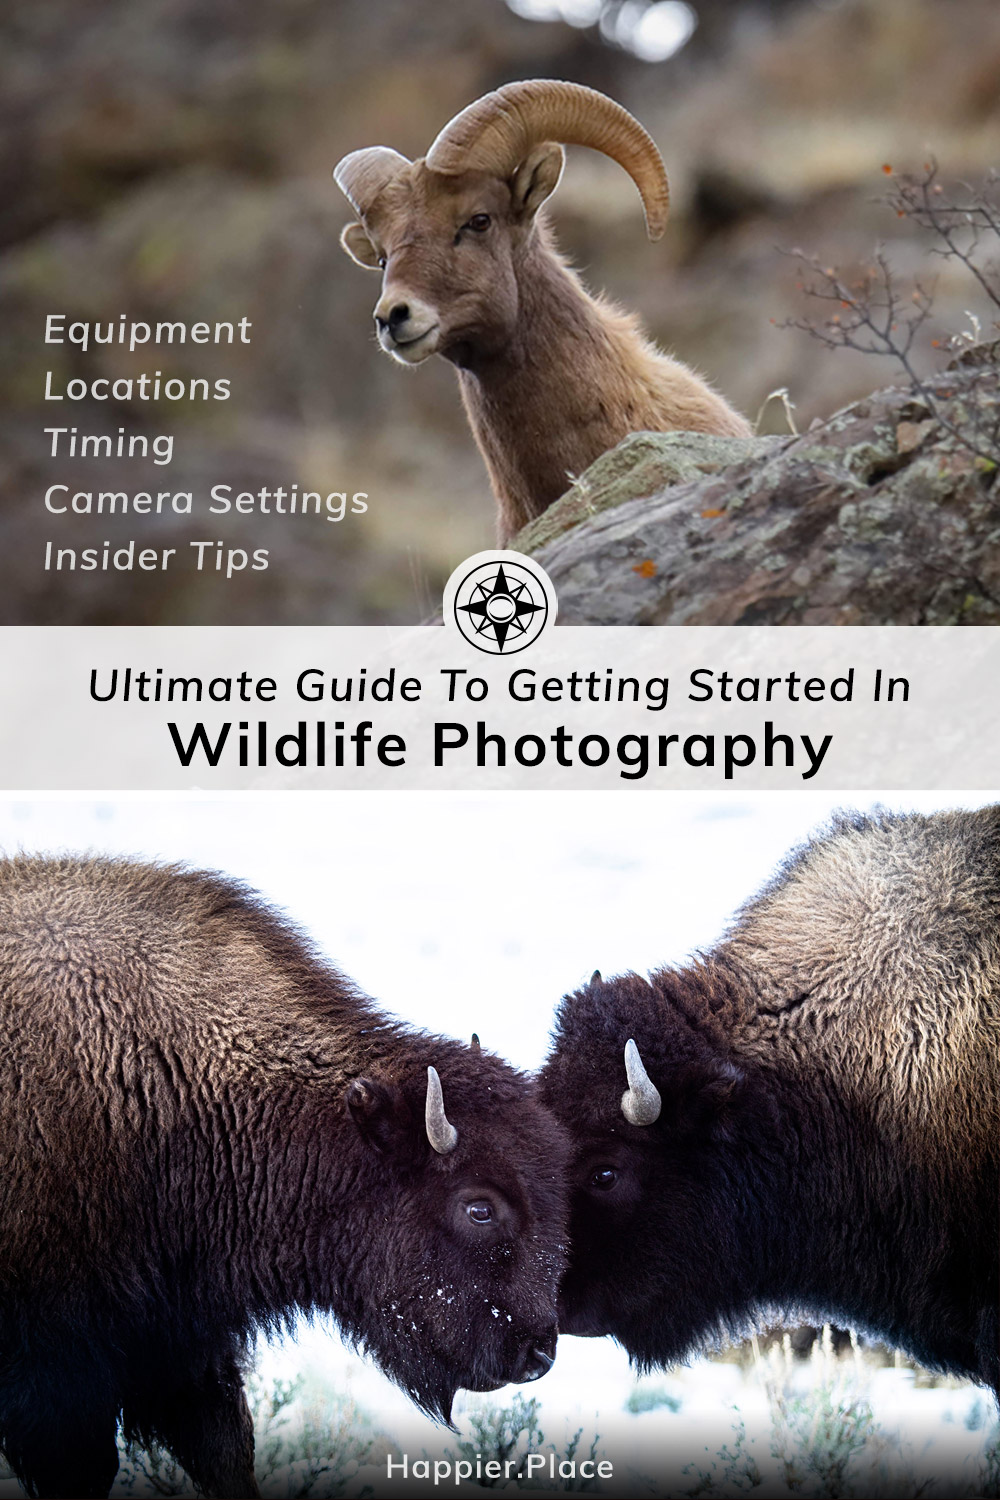 Ultimate Guide to getting started in wildlife photography, equipment, locations, timing, camera settings, insider tips, Happier Place, bison, bighorn sheep